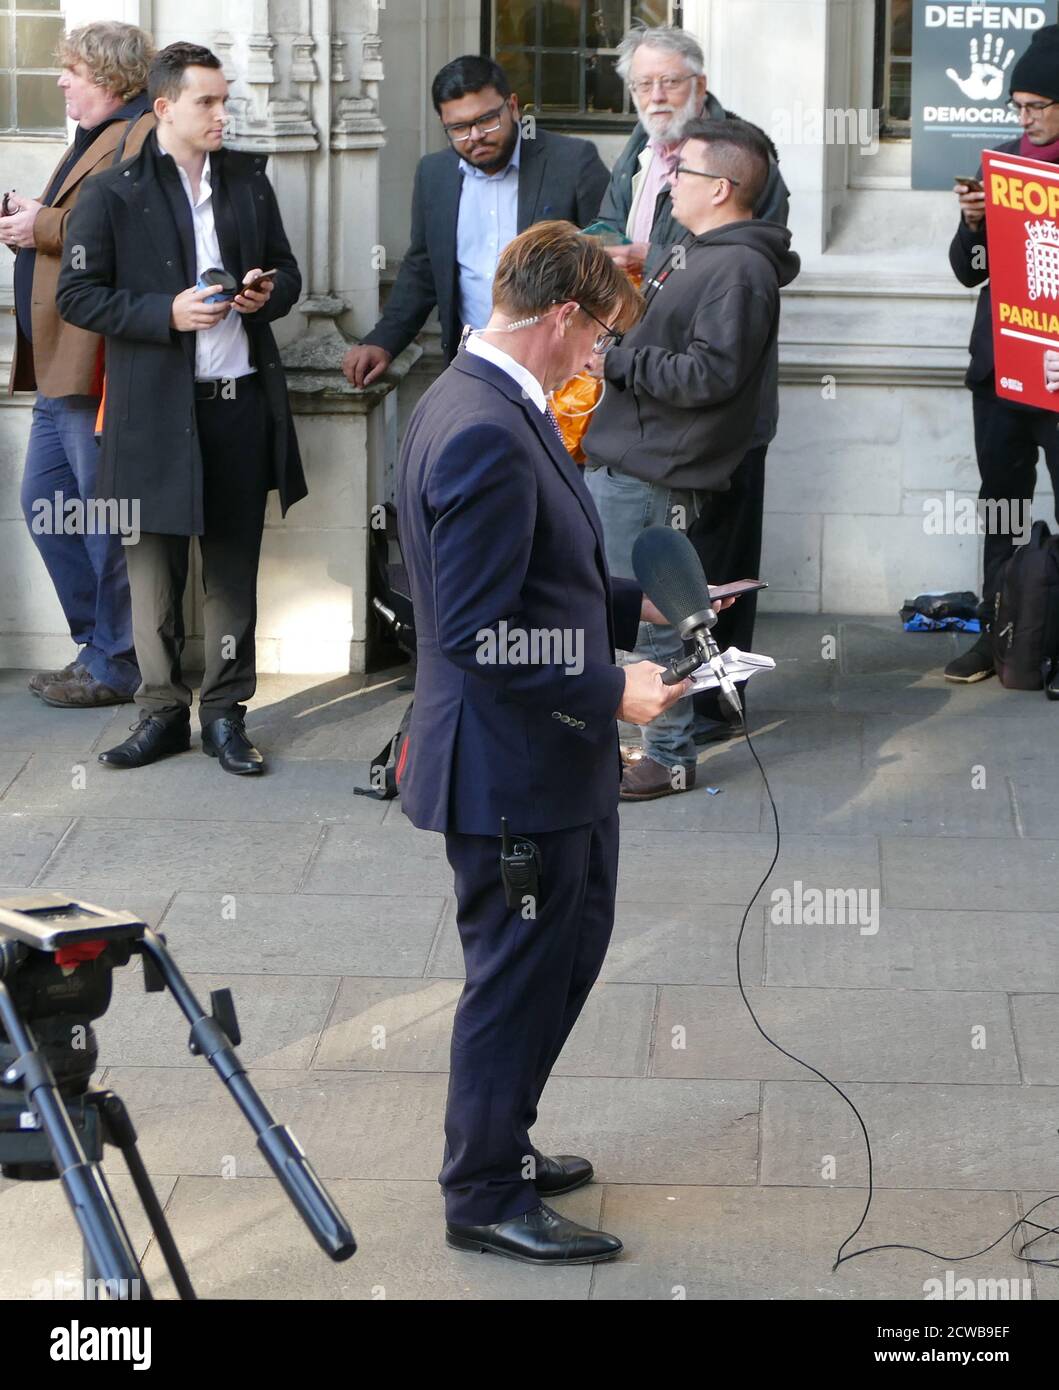 Jason Farrell, political correspondent for Sky News, attends the Supreme Court in London to report on the hearing to challenge the Prorogation of Parliament. 17th Sept 2019.the prorogation of the Parliament, was ordered by Queen Elizabeth II upon the advice of the Conservative Prime Minister, Boris Johnson, on 28 August 2019. opposition politicians saw this as an unconstitutional attempt to reduce parliamentary scrutiny of the Government's Brexit plan. Stock Photo